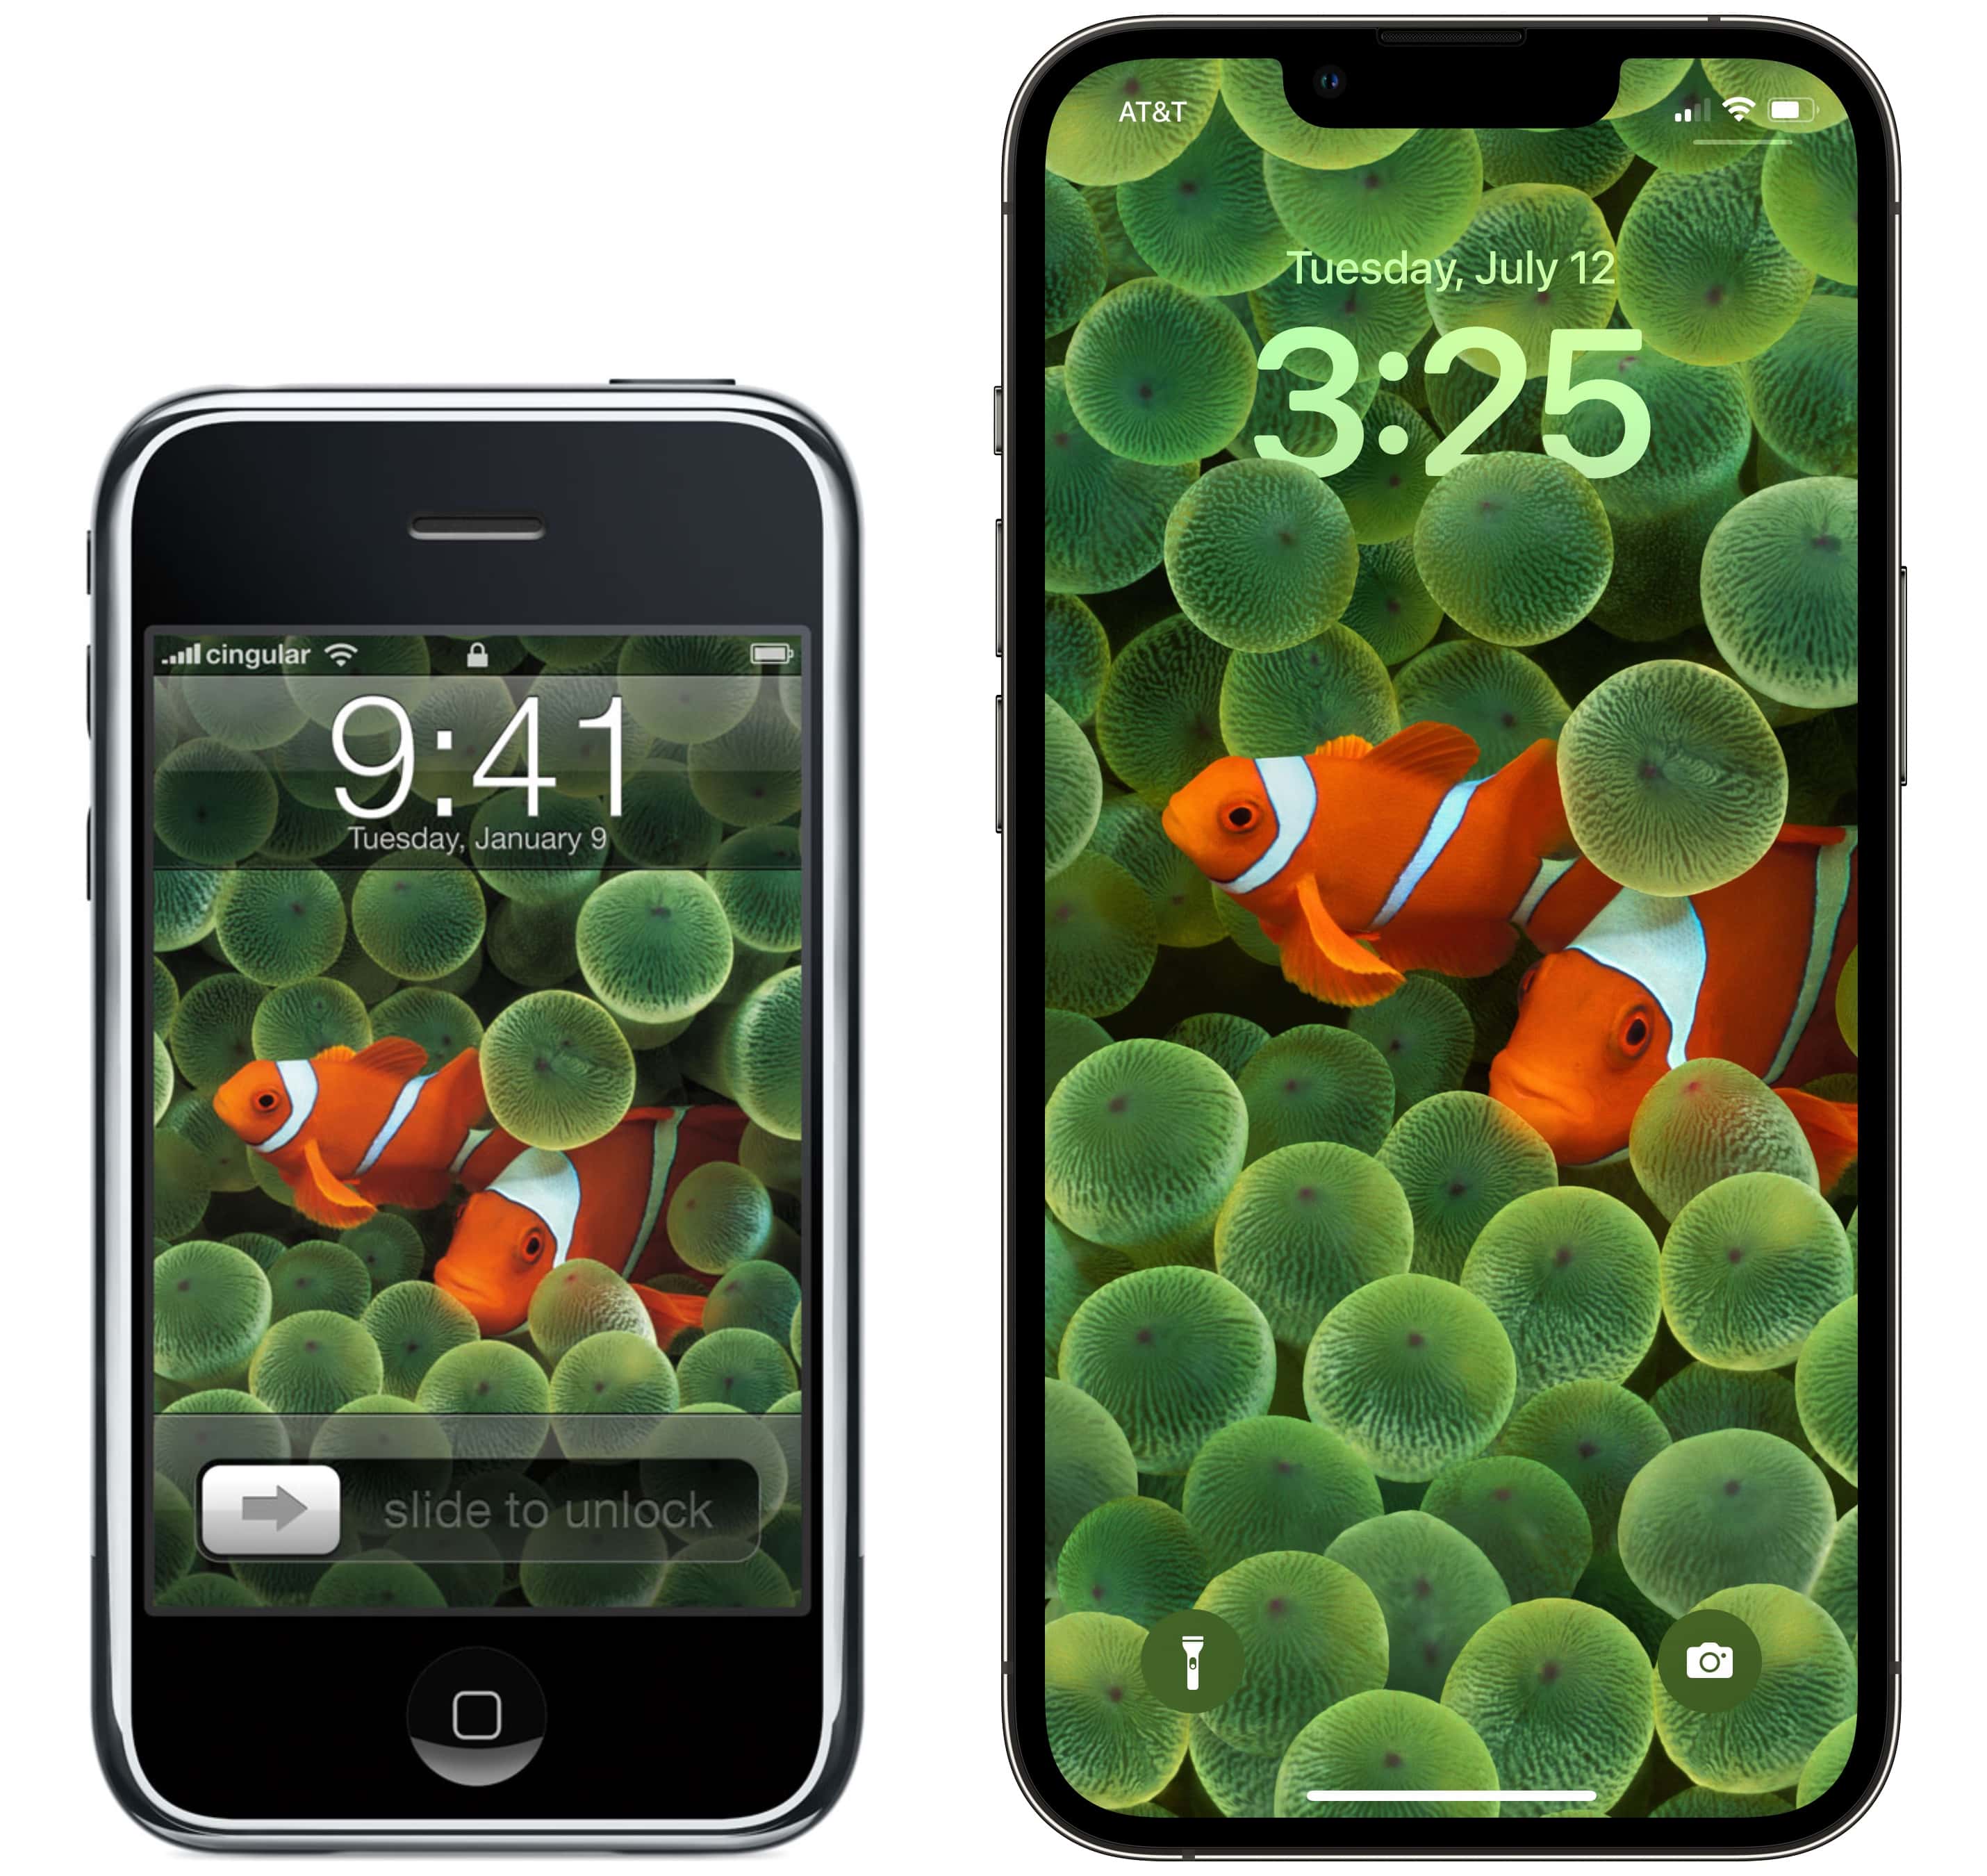 The Clownfish wallpaper comes to the iPhone for the first (or second?) time ever.